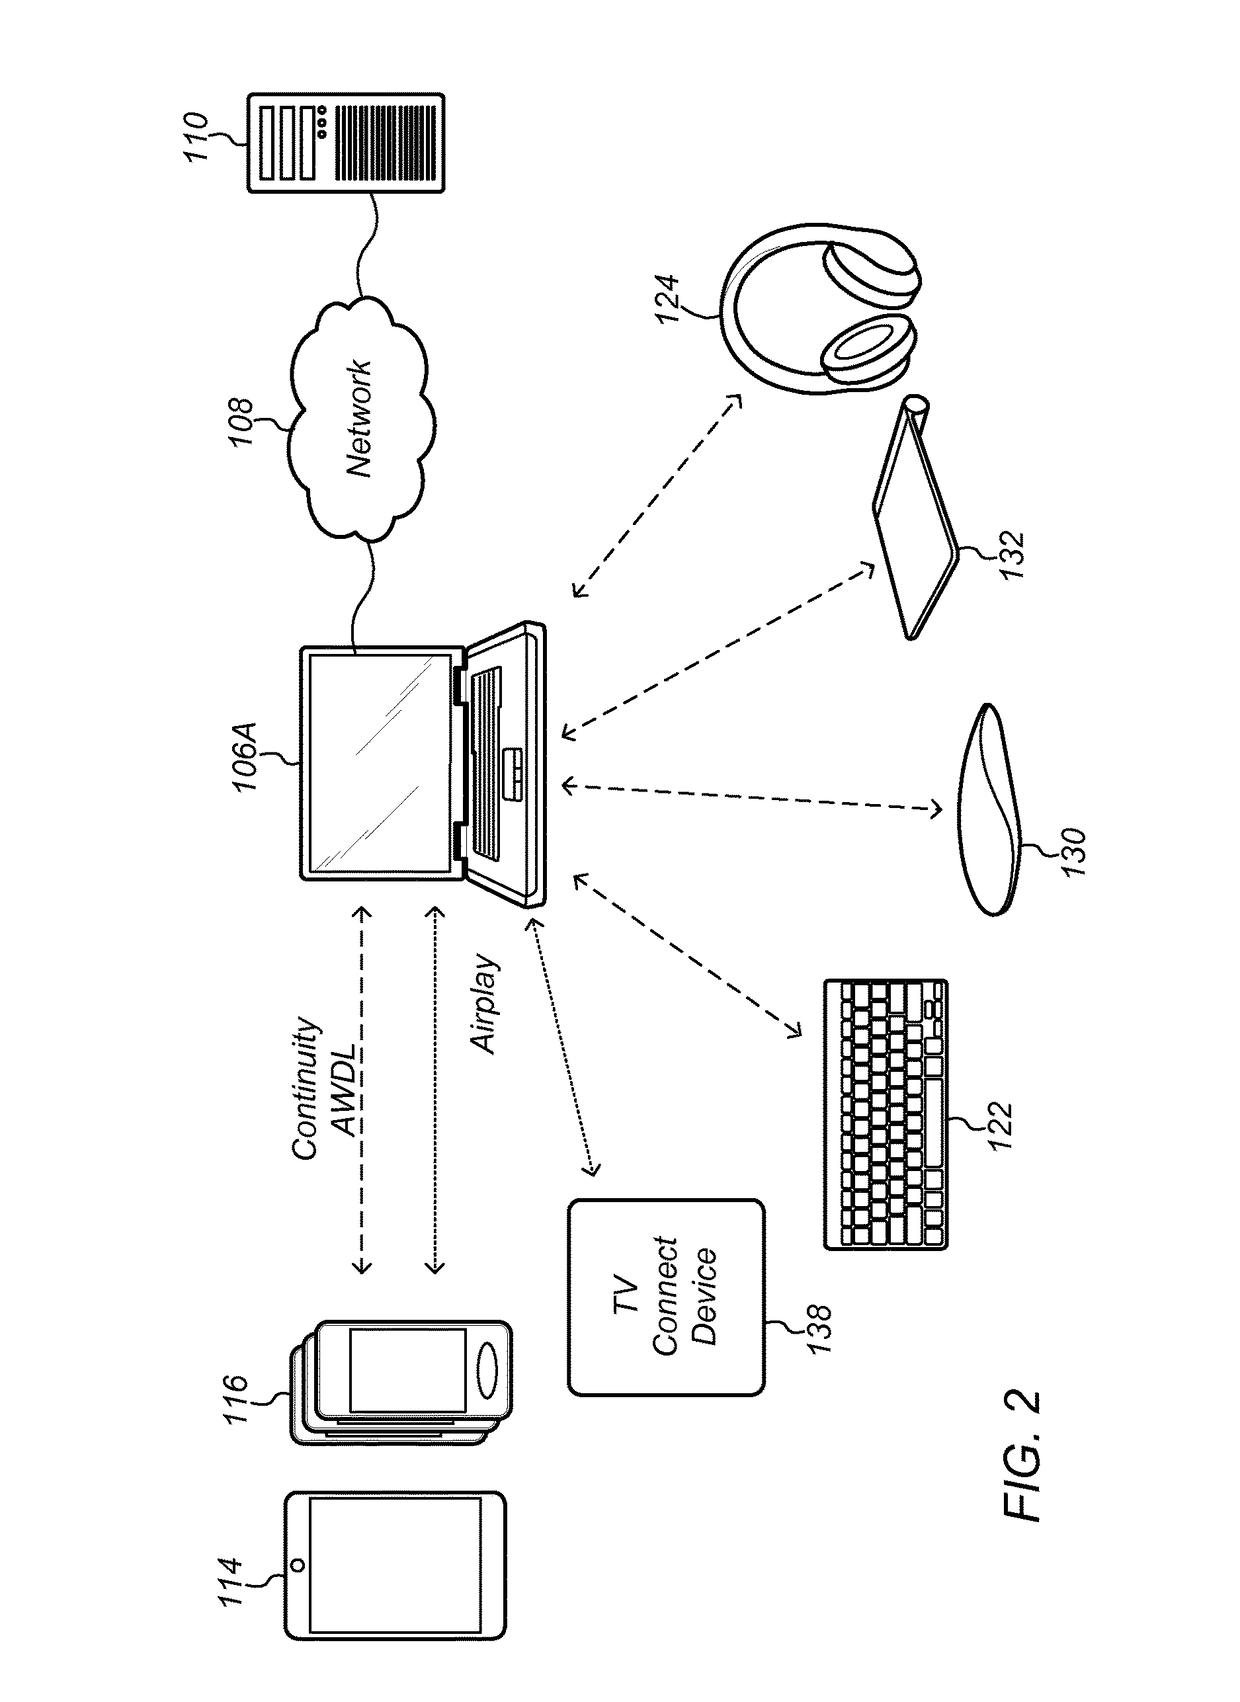 Cloud-based proximity pairing and switching for peer-to-peer devices